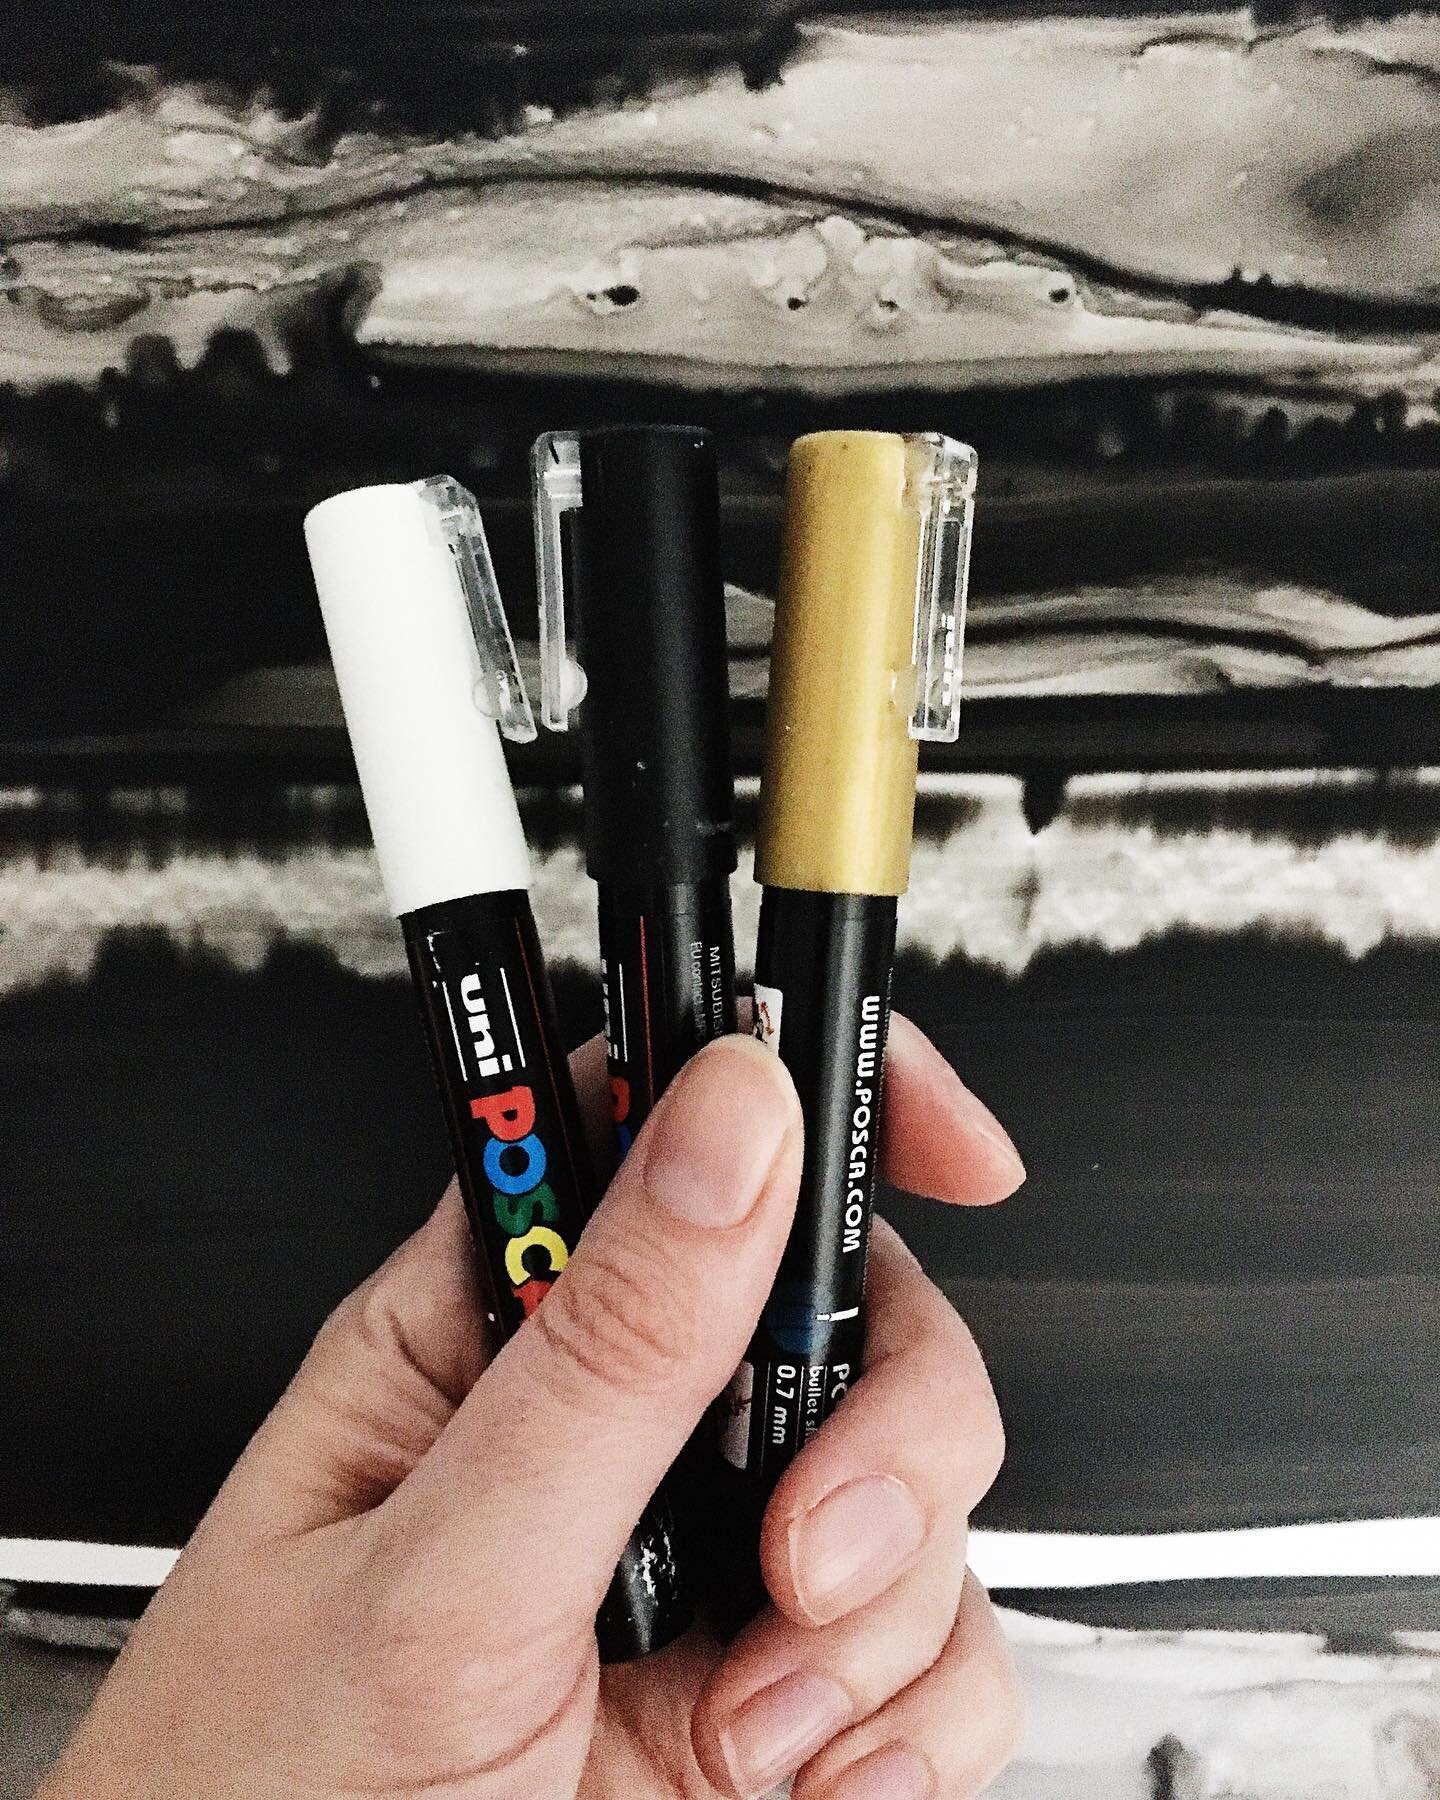 I 🖤 paint markers, can&rsquo;t wait to use them over the weekend!